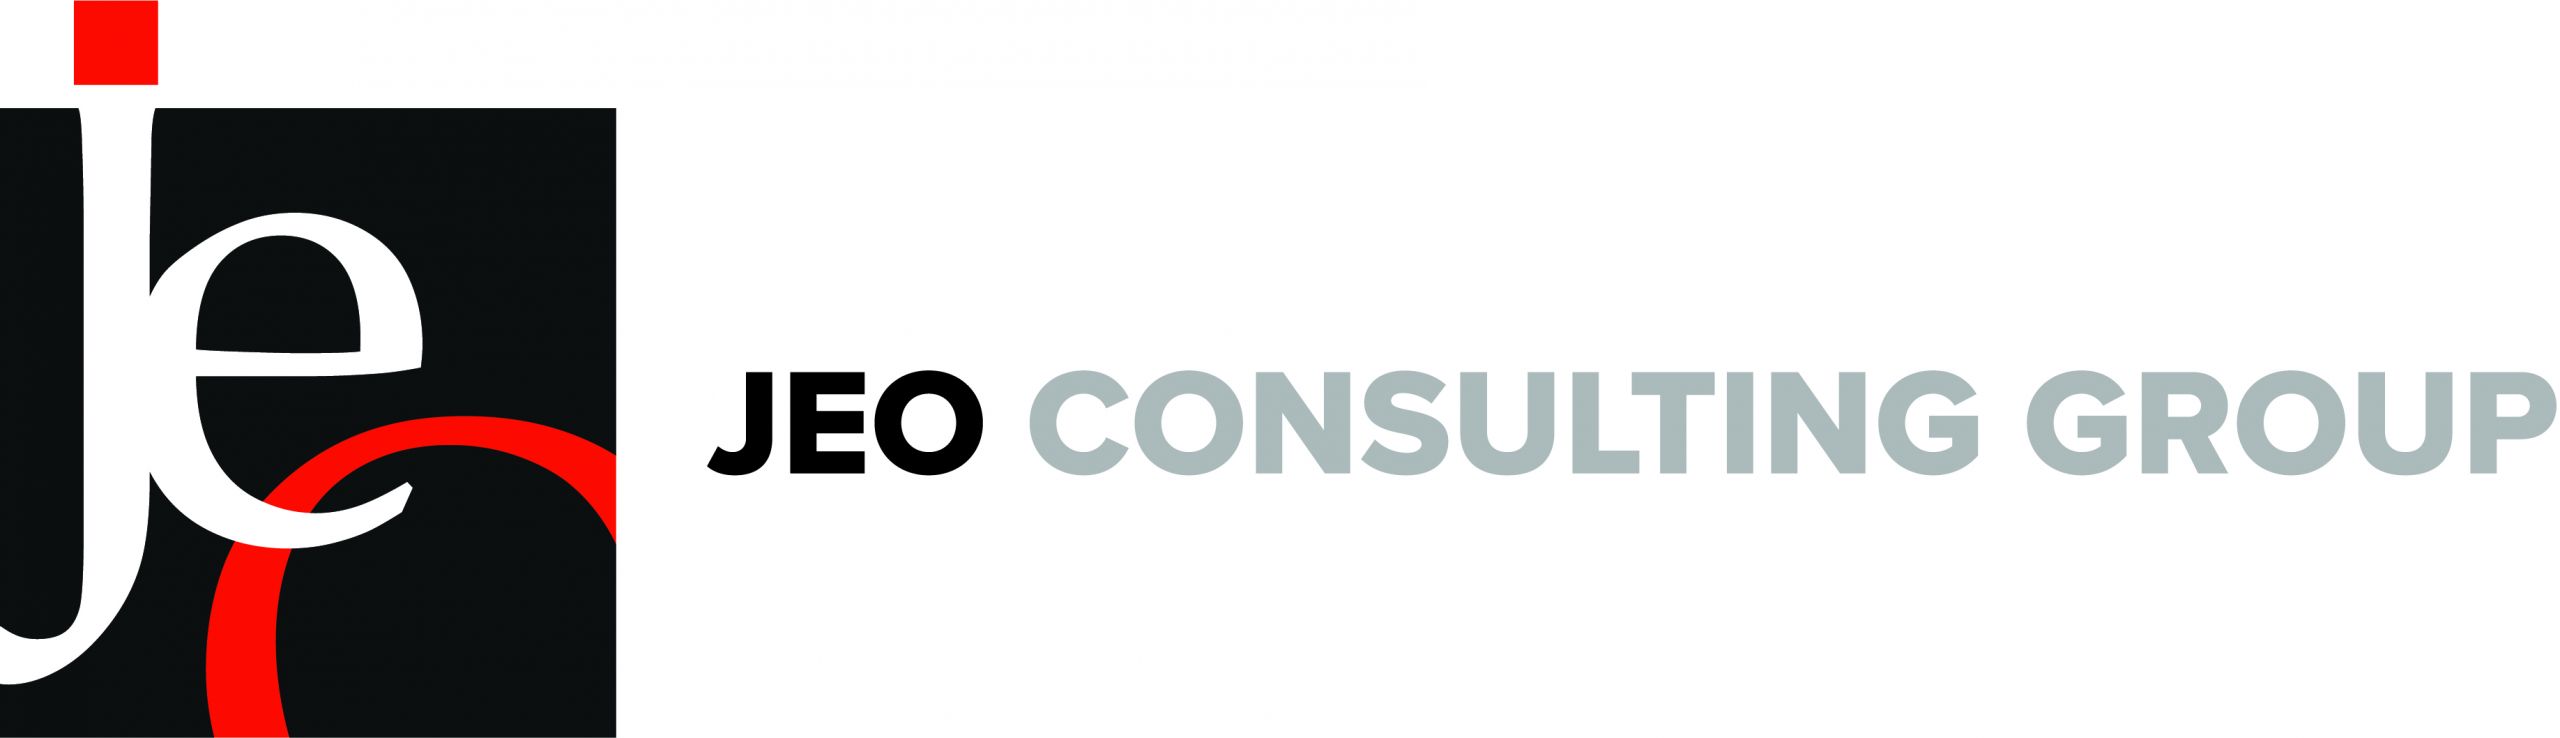 JEO Consulting